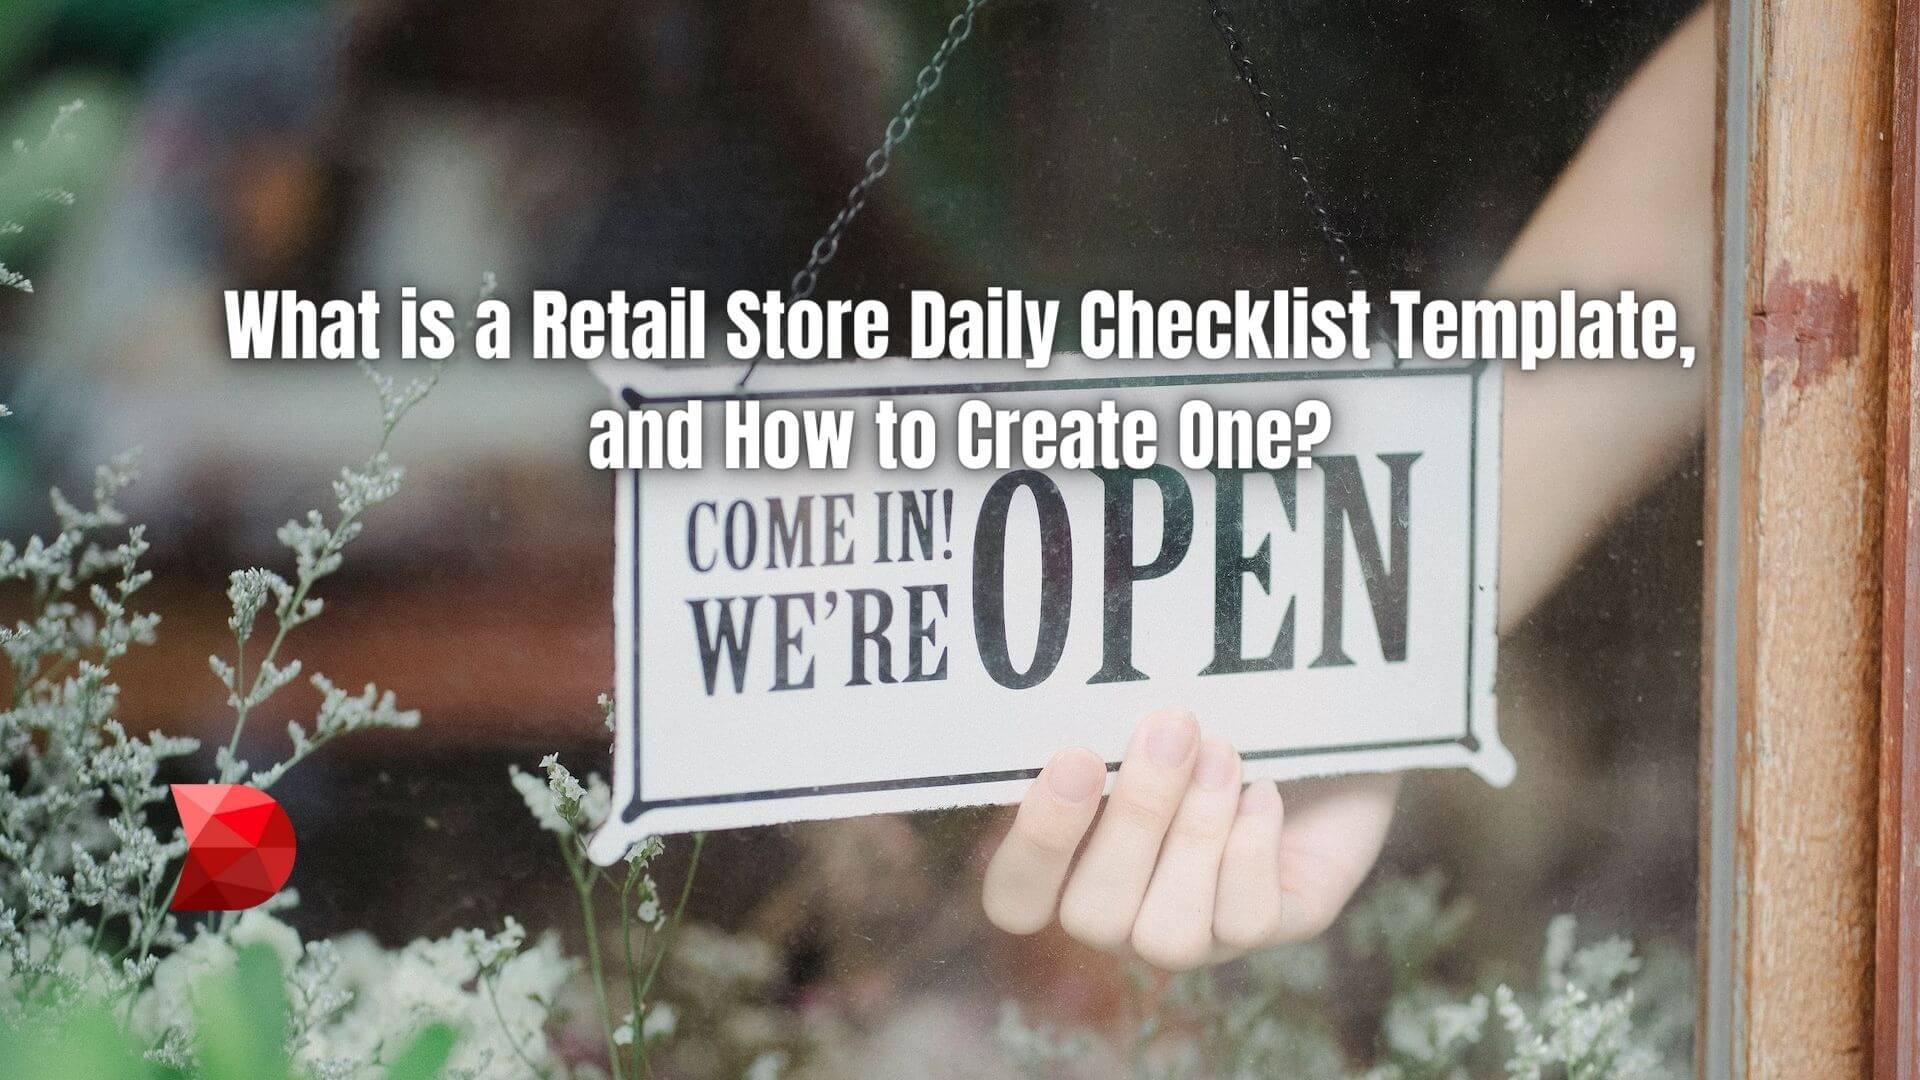 Creating a retail store daily opening checklist template helps store managers ensure the efficient running of store operations. Learn how!